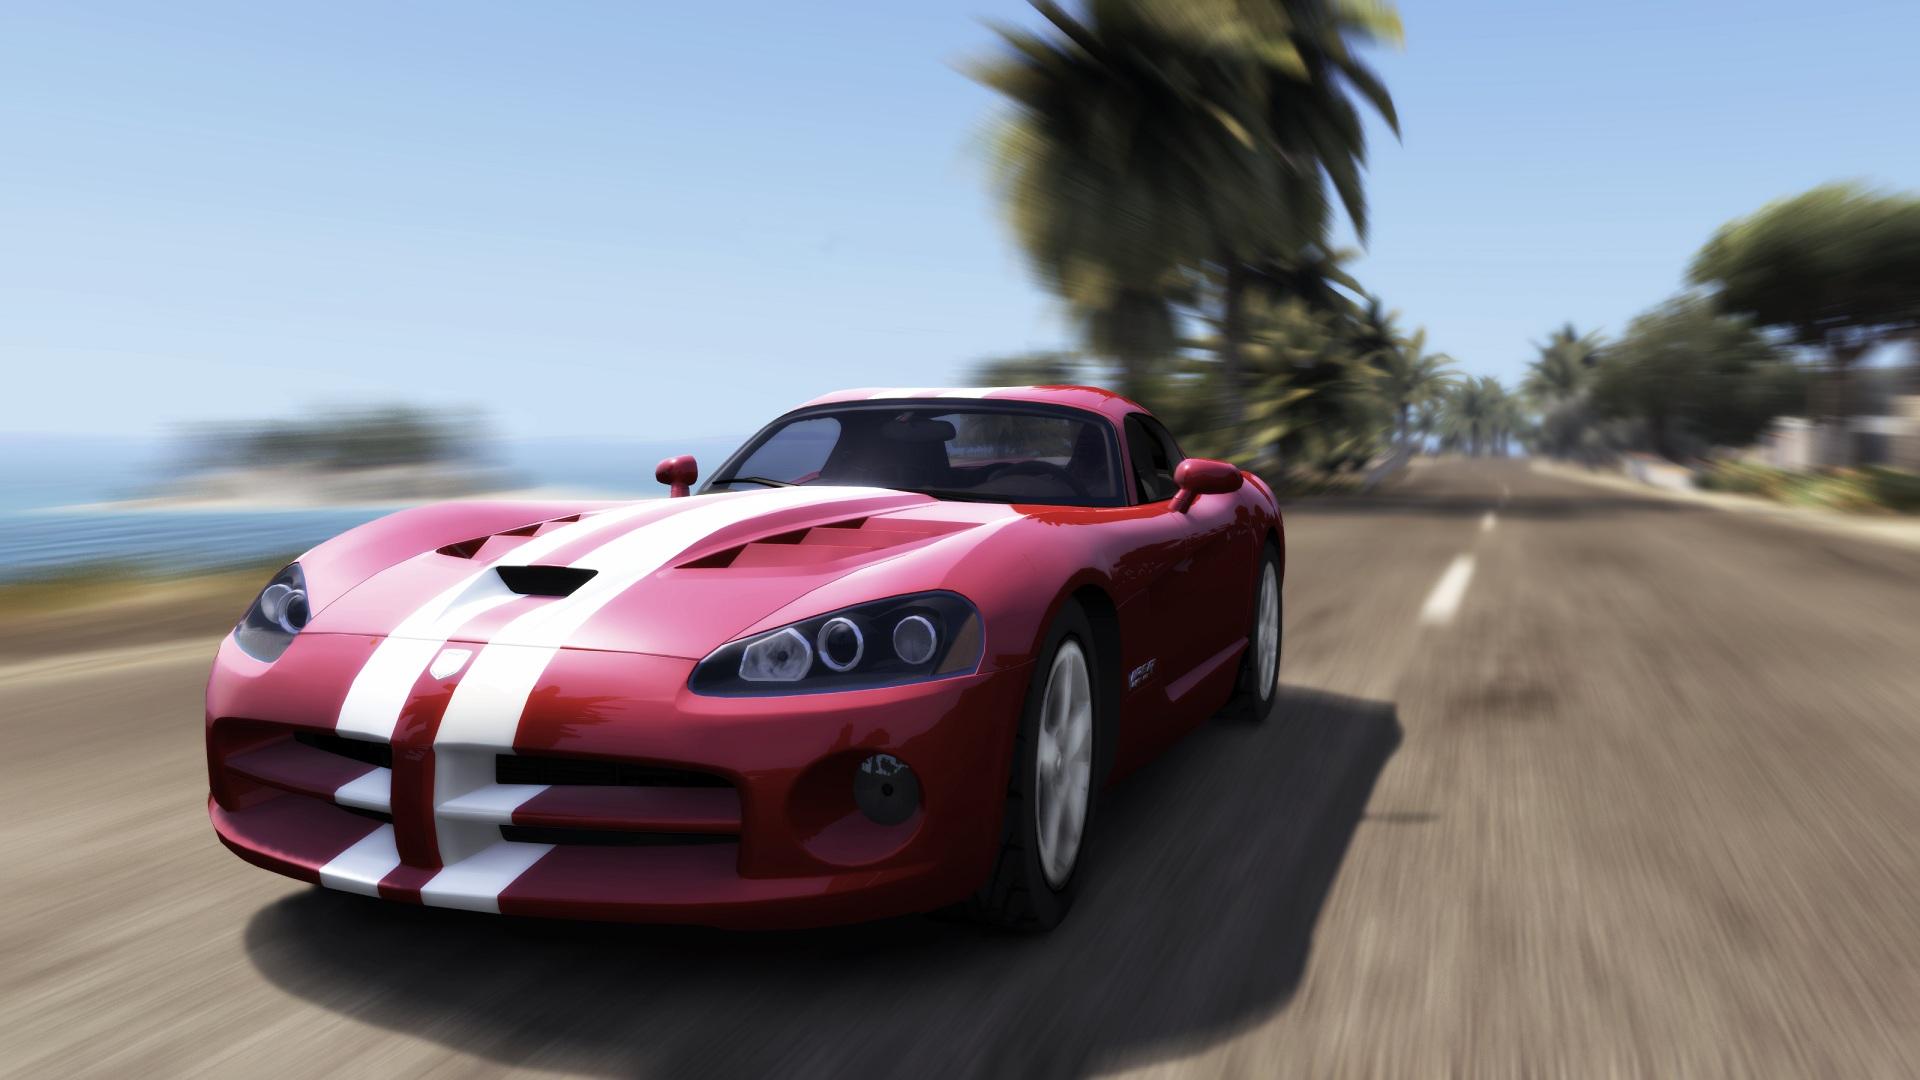 download game test drive unlimited 2 pc full version